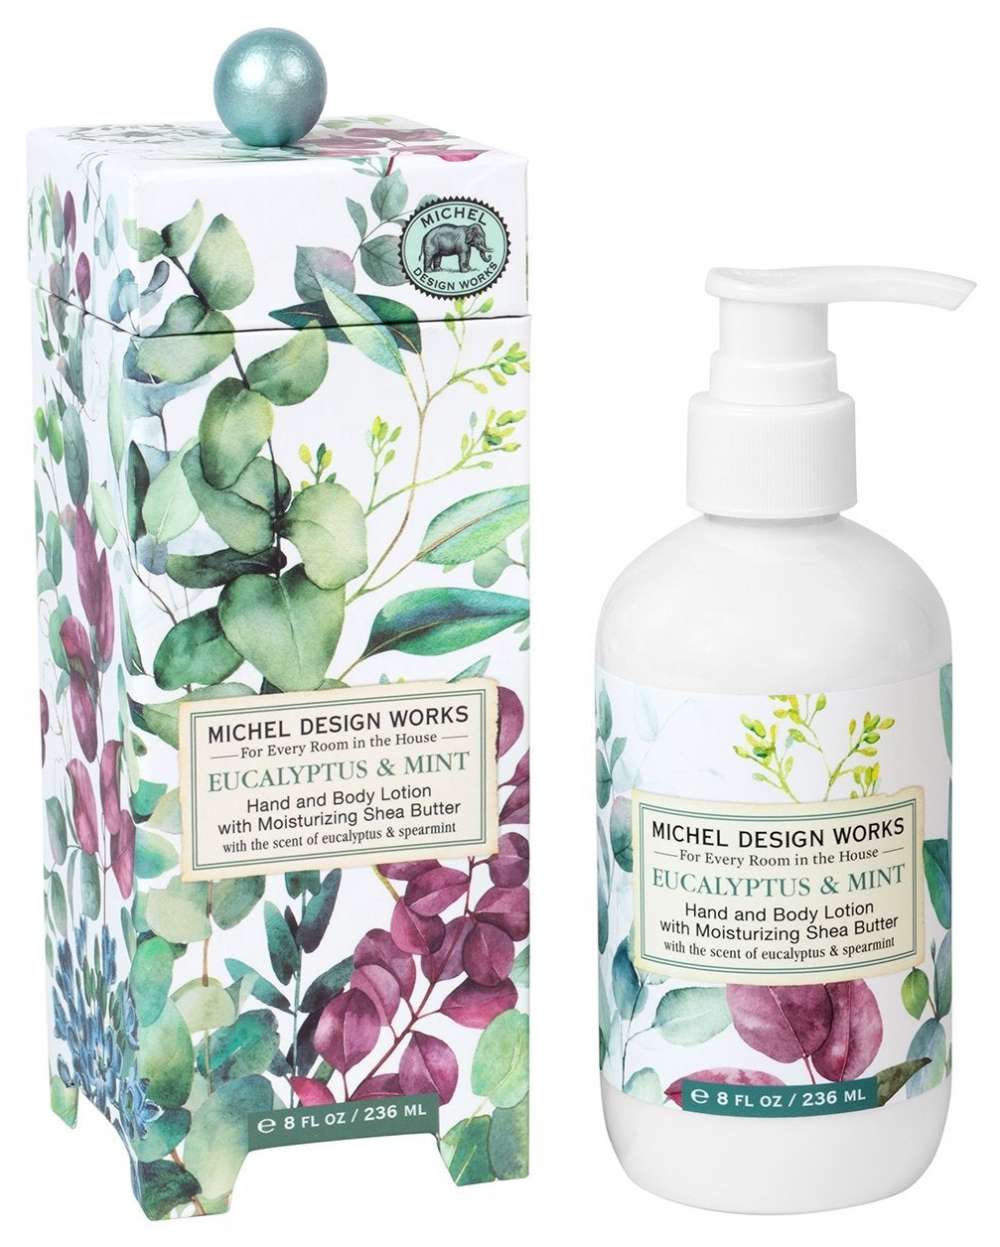 Eucalyptus & Mint Hand and Body Lotion